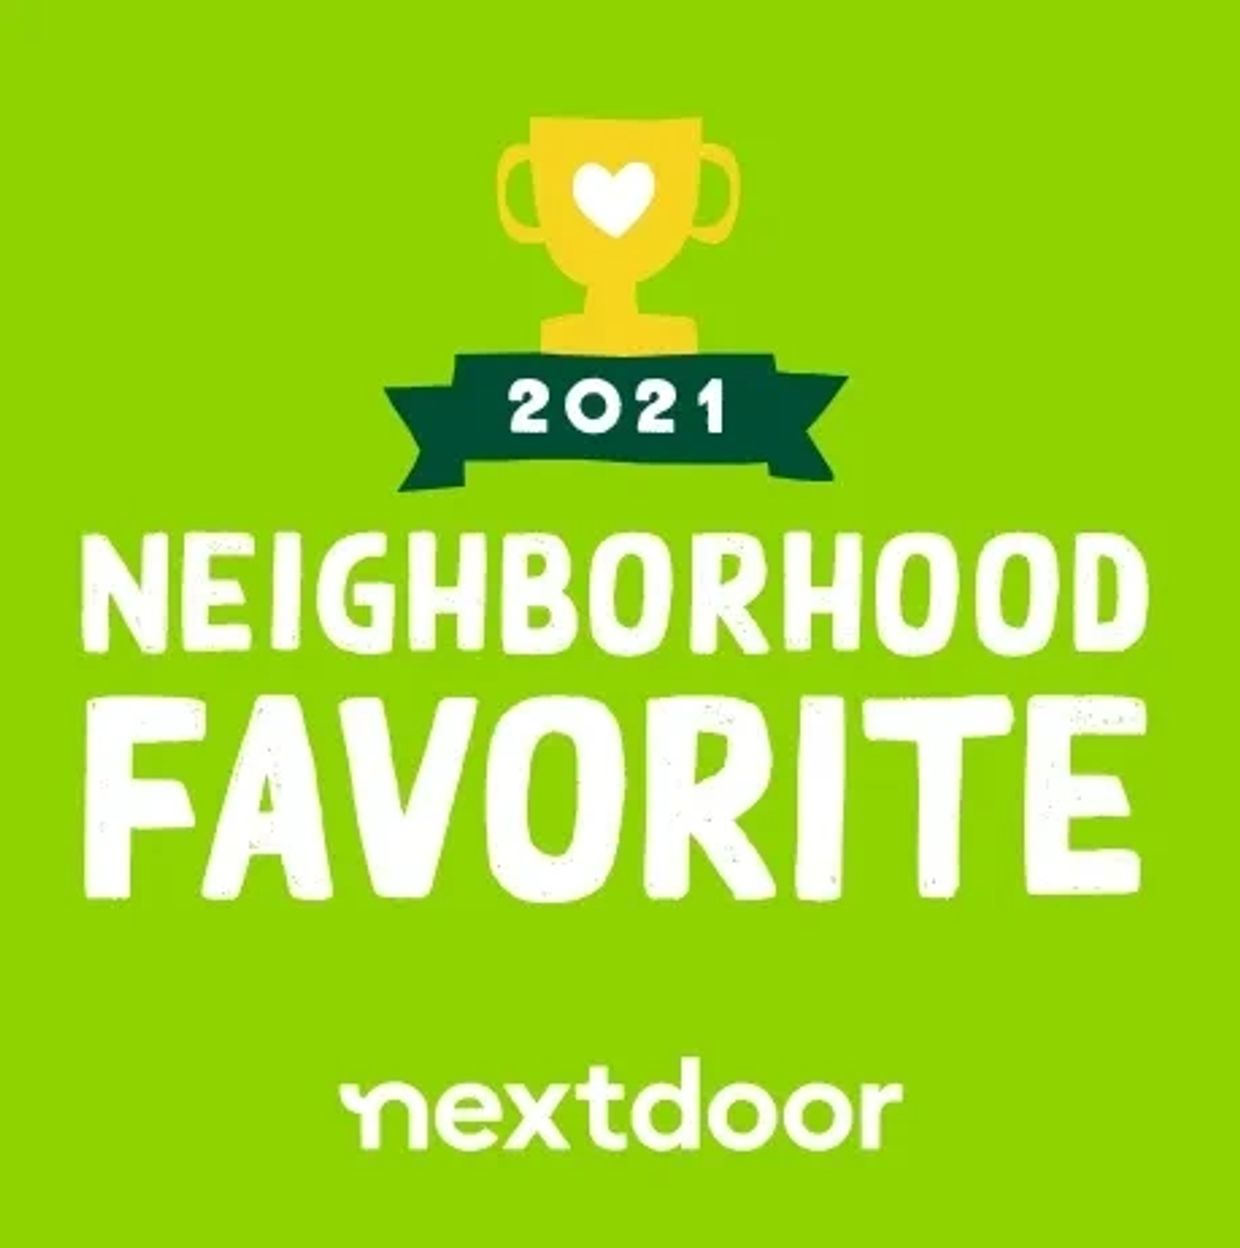 Ideal-Seal is recognized by our nextdoor customers as a neighborhood favorite 